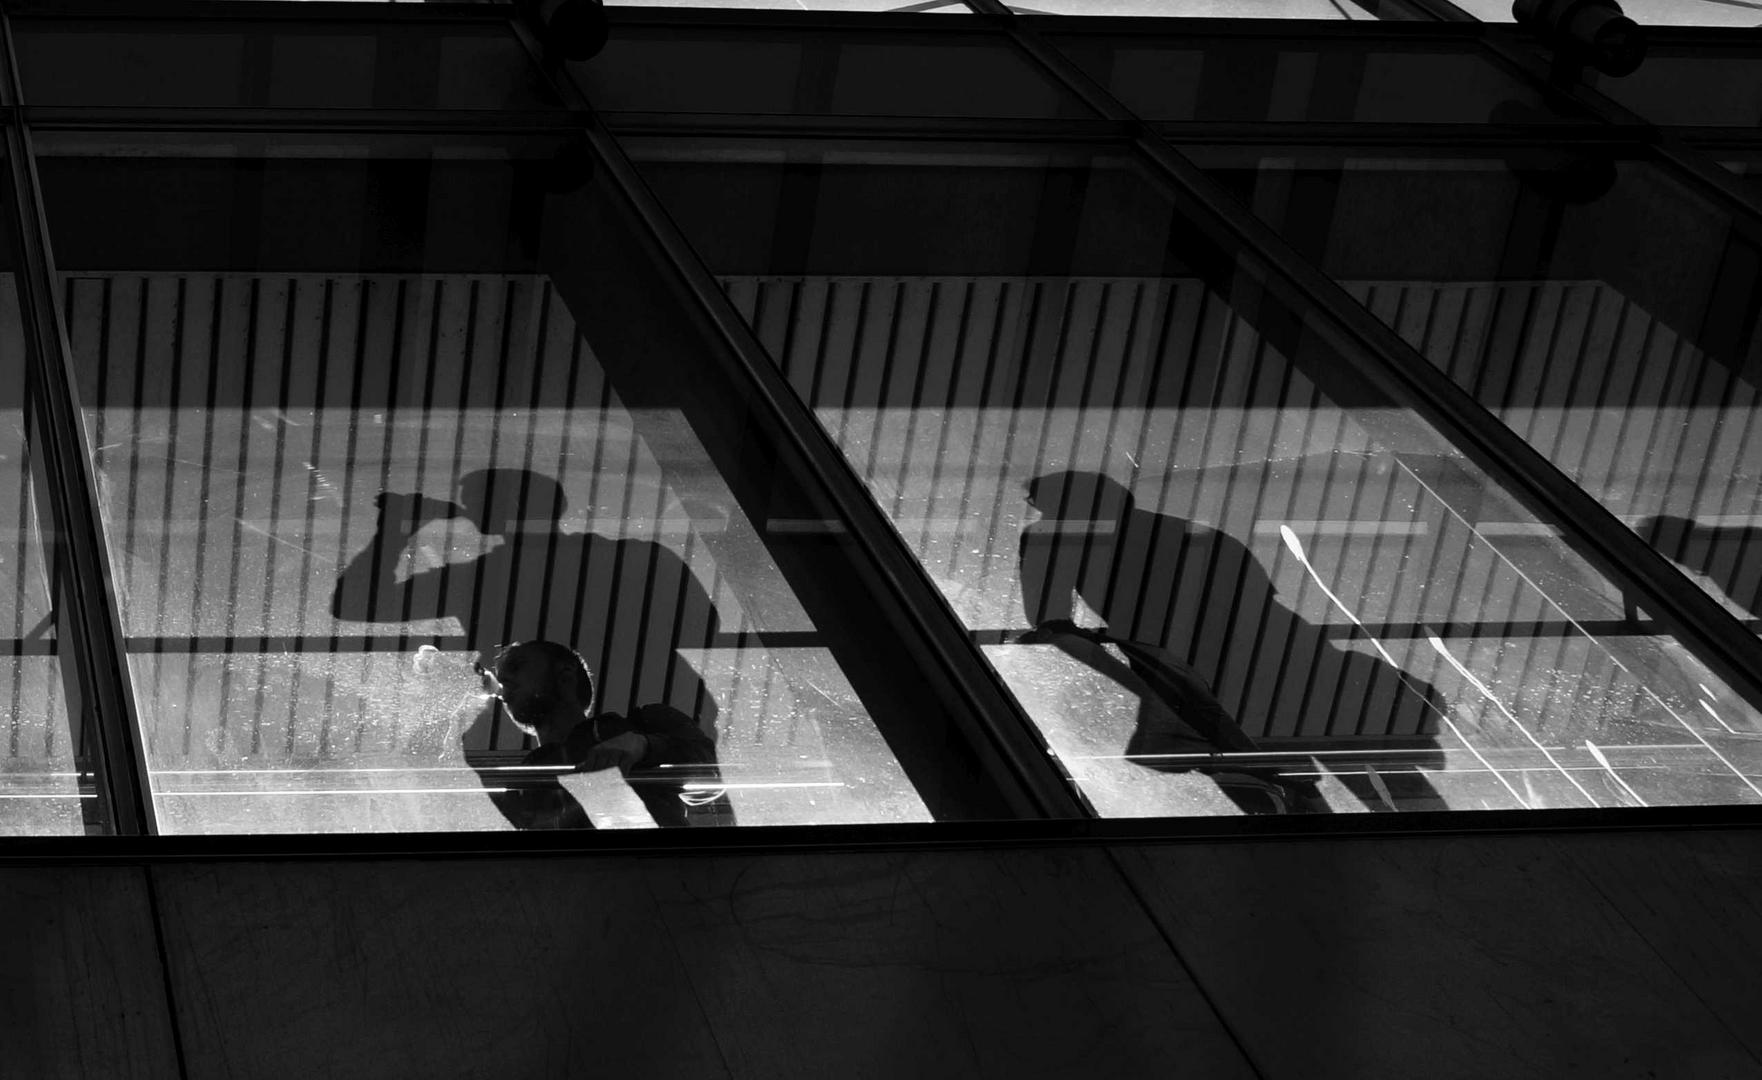 Shadows at the glasfront